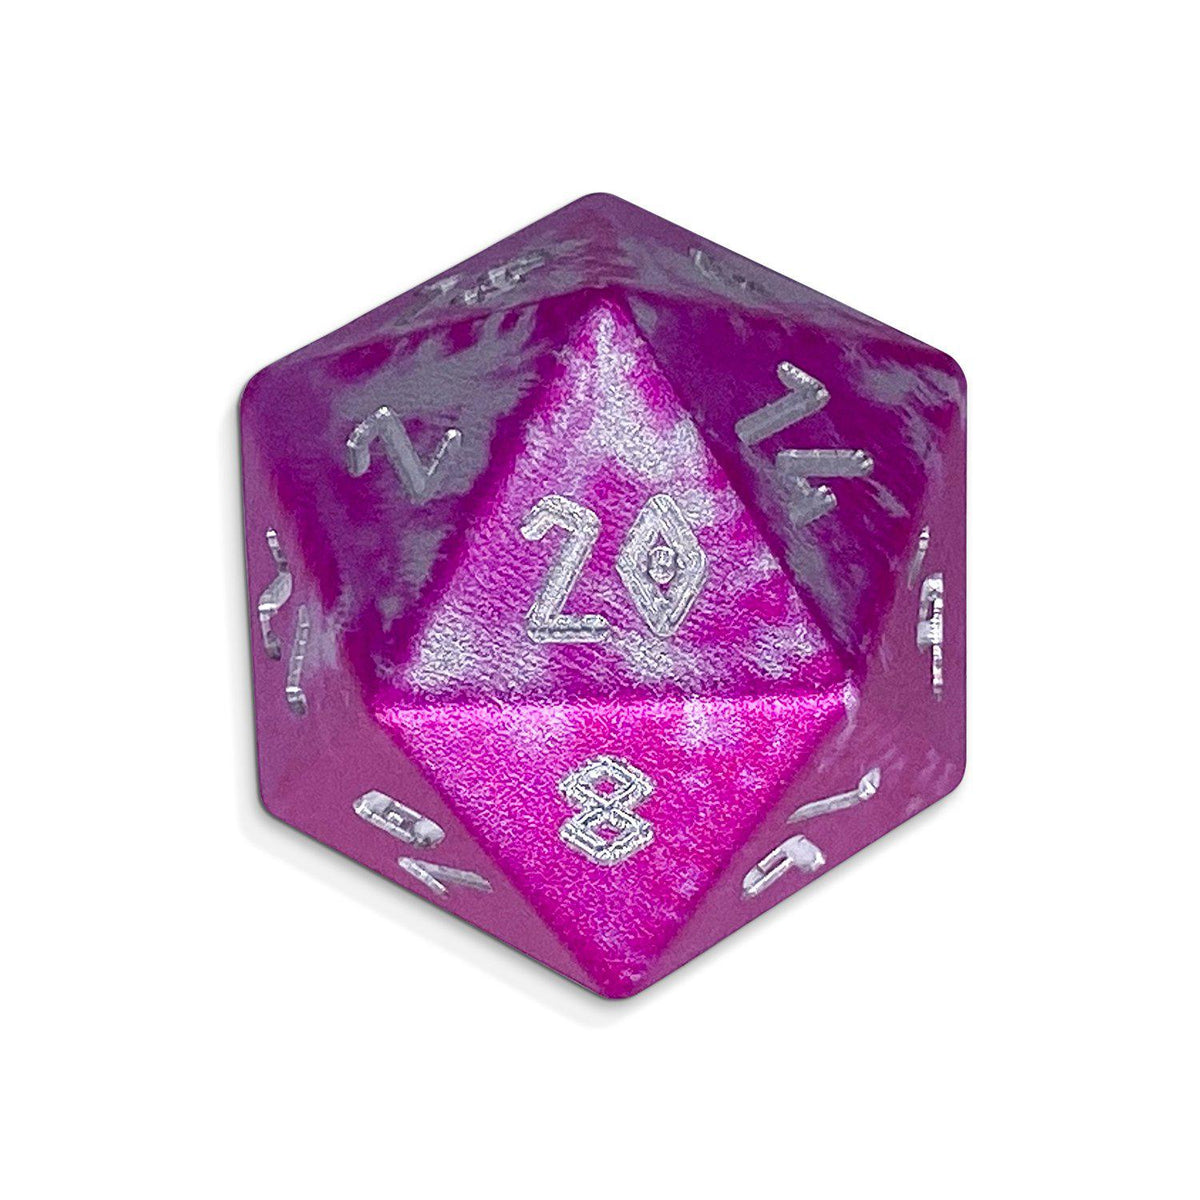 Single Wondrous Dice® D20 in Sugar Bomb by Norse Foundry® 6063 Aircraft Grade Aluminum